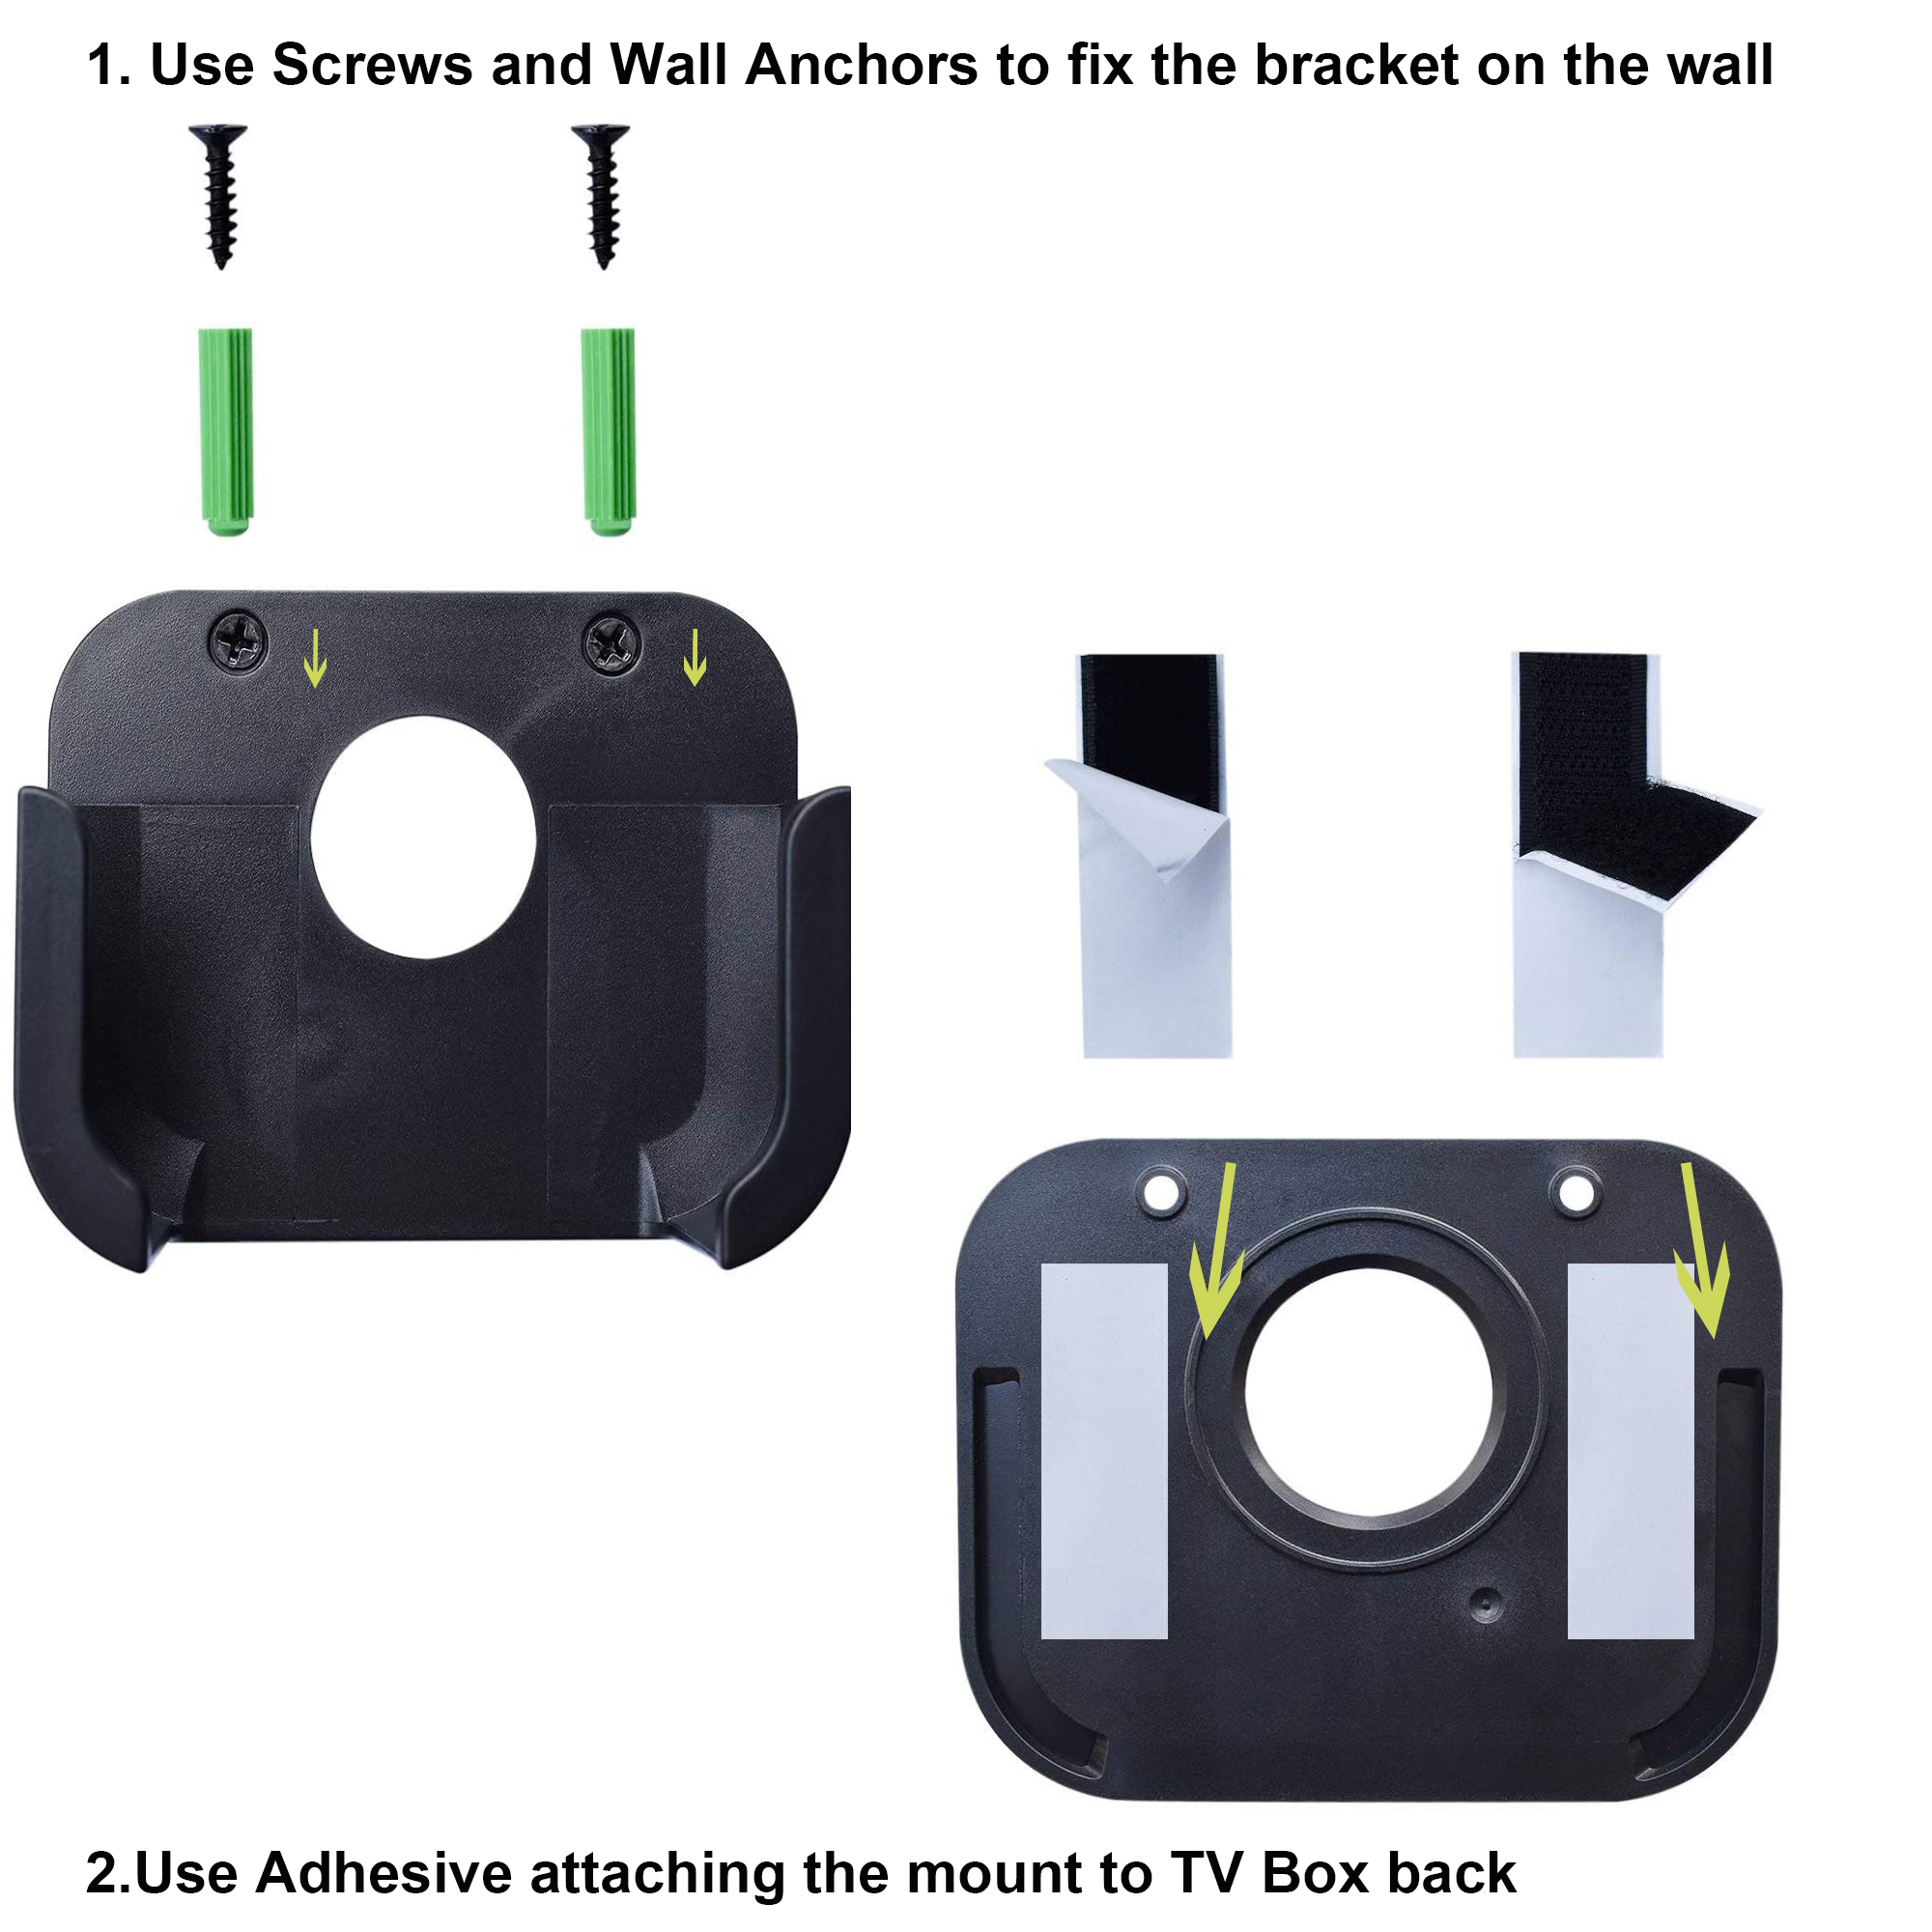 TOKERSE TV Wall Mount Bracket Holder for Apple TV 4K (2nd 2021 & 1st Gen) and Apple TV HD - Silicone Remote Case Cover Fits for Apple TV 4K Siri Remote (2nd Generation) and HD 5th Generation - Black